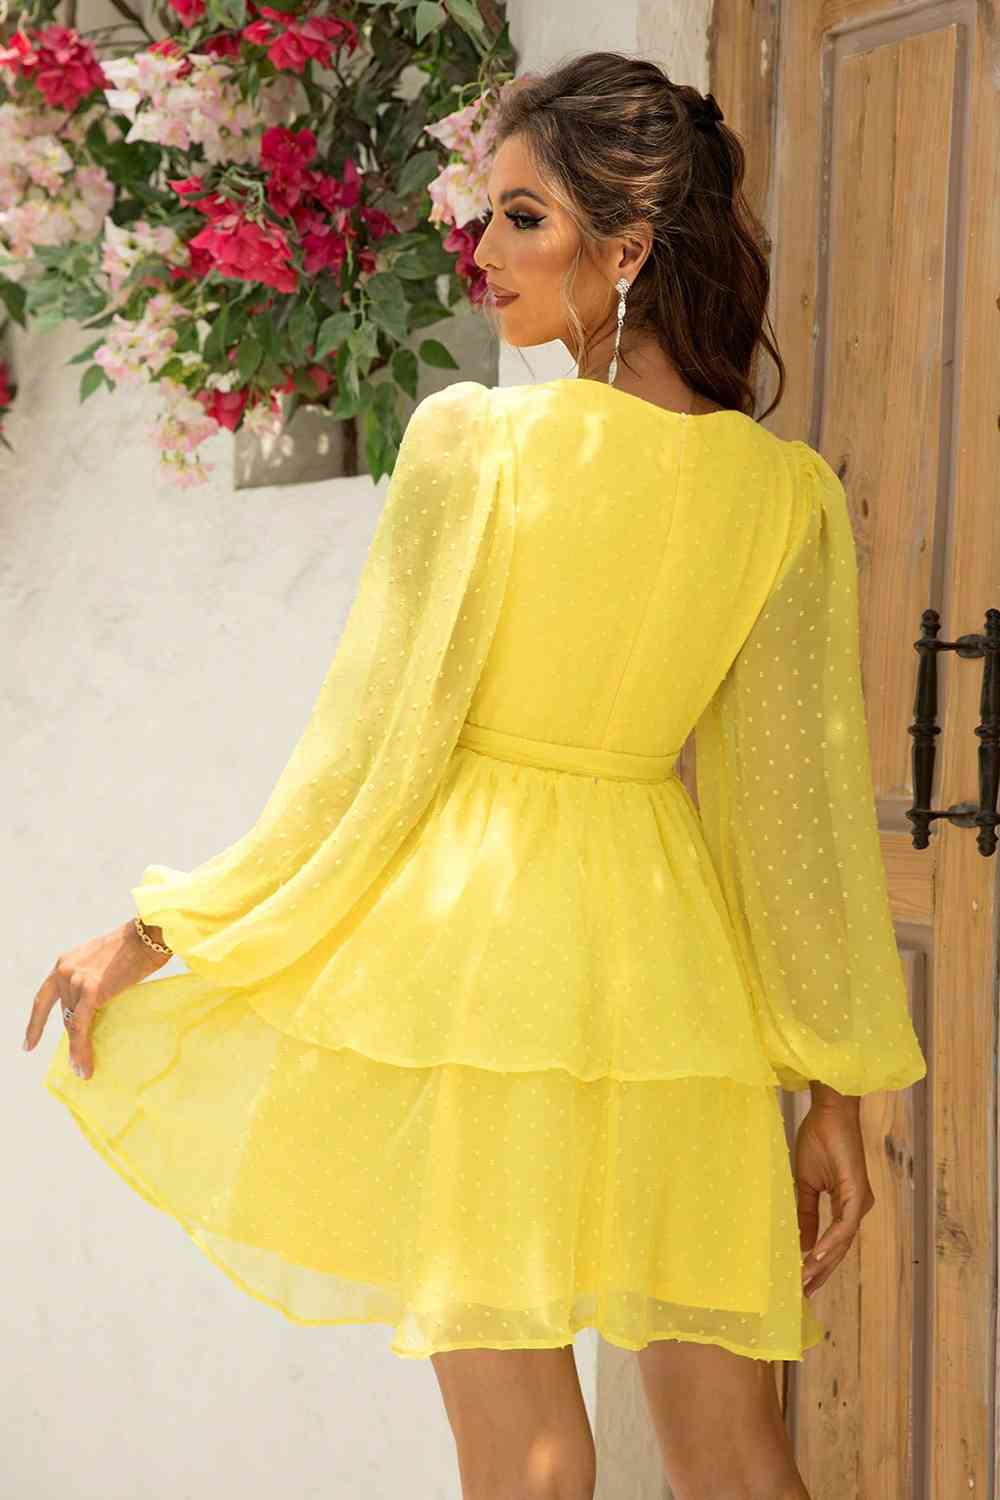 Tie Waist Balloon Sleeve Layered Dress - Kawaii Stop - Confidence, Dress, Easy Care, Elegant, Fashion, Layered Dress, Opaque Sheer, Polyester Dress, Ringing-N, Ship From Overseas, Slightly Stretchy, Statement Piece, Strappy Sandals, Style, Swiss Dot, Tied Dress, Wide-Brimmed Hat, Women's Clothing